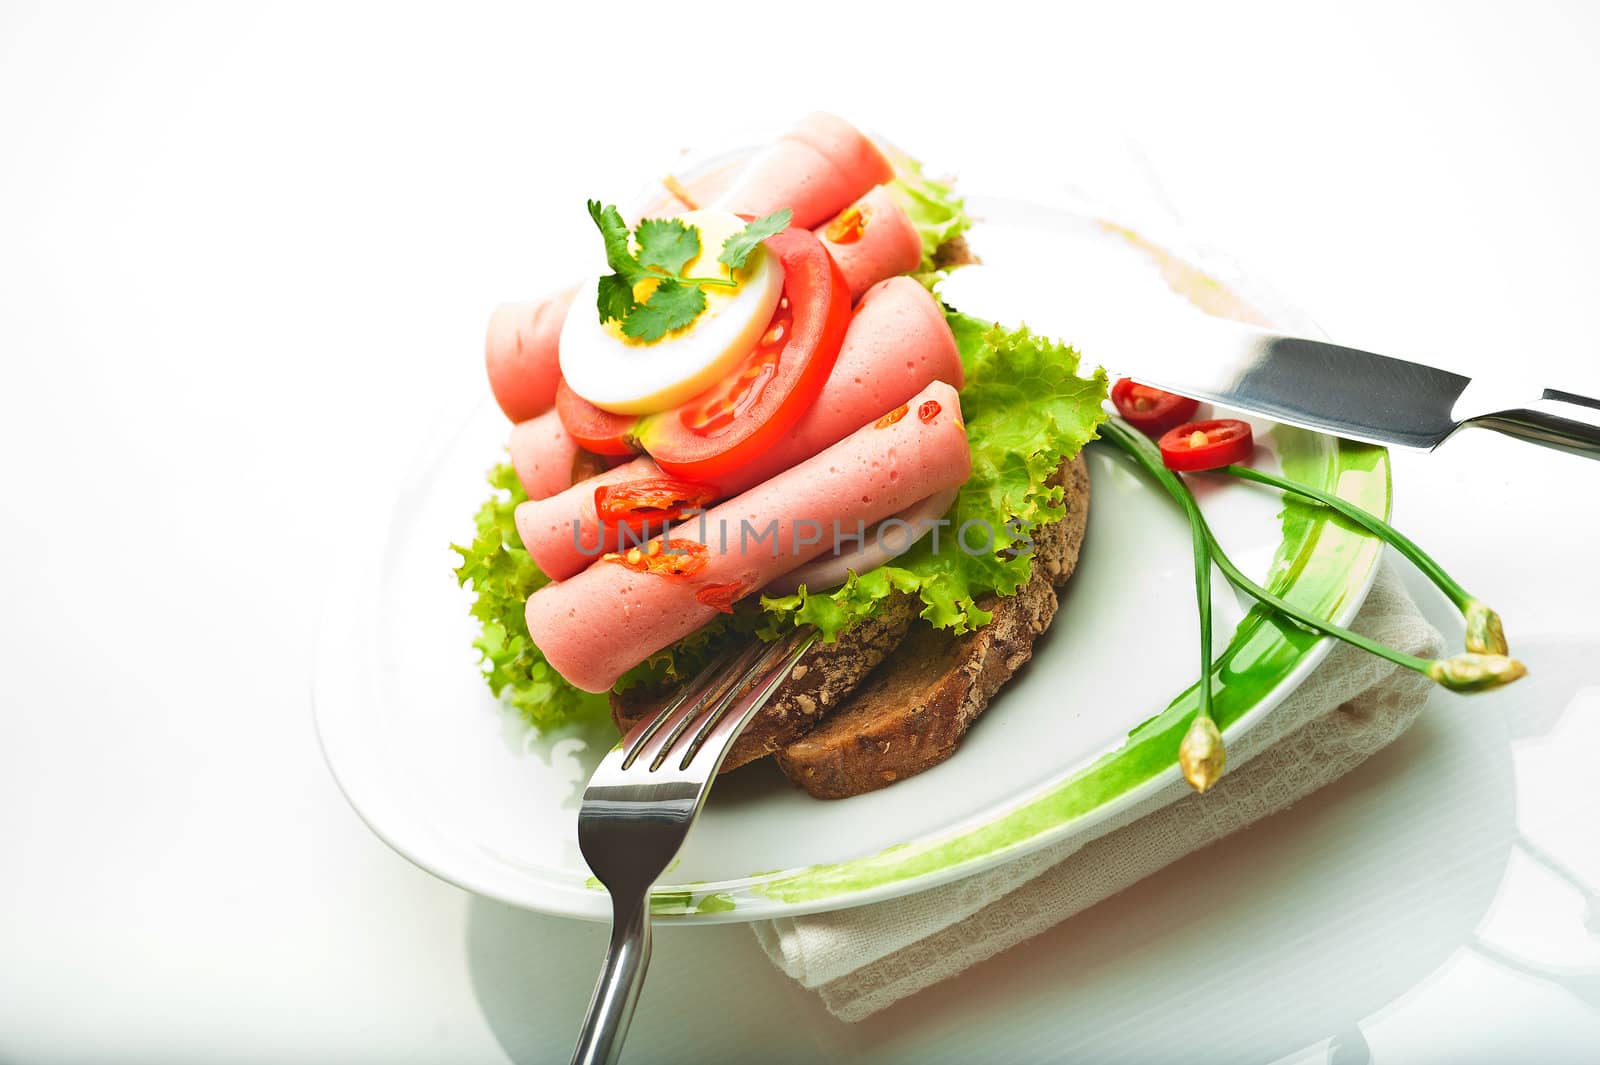 Brown bread with chili sausage slices green salad tomato and egg